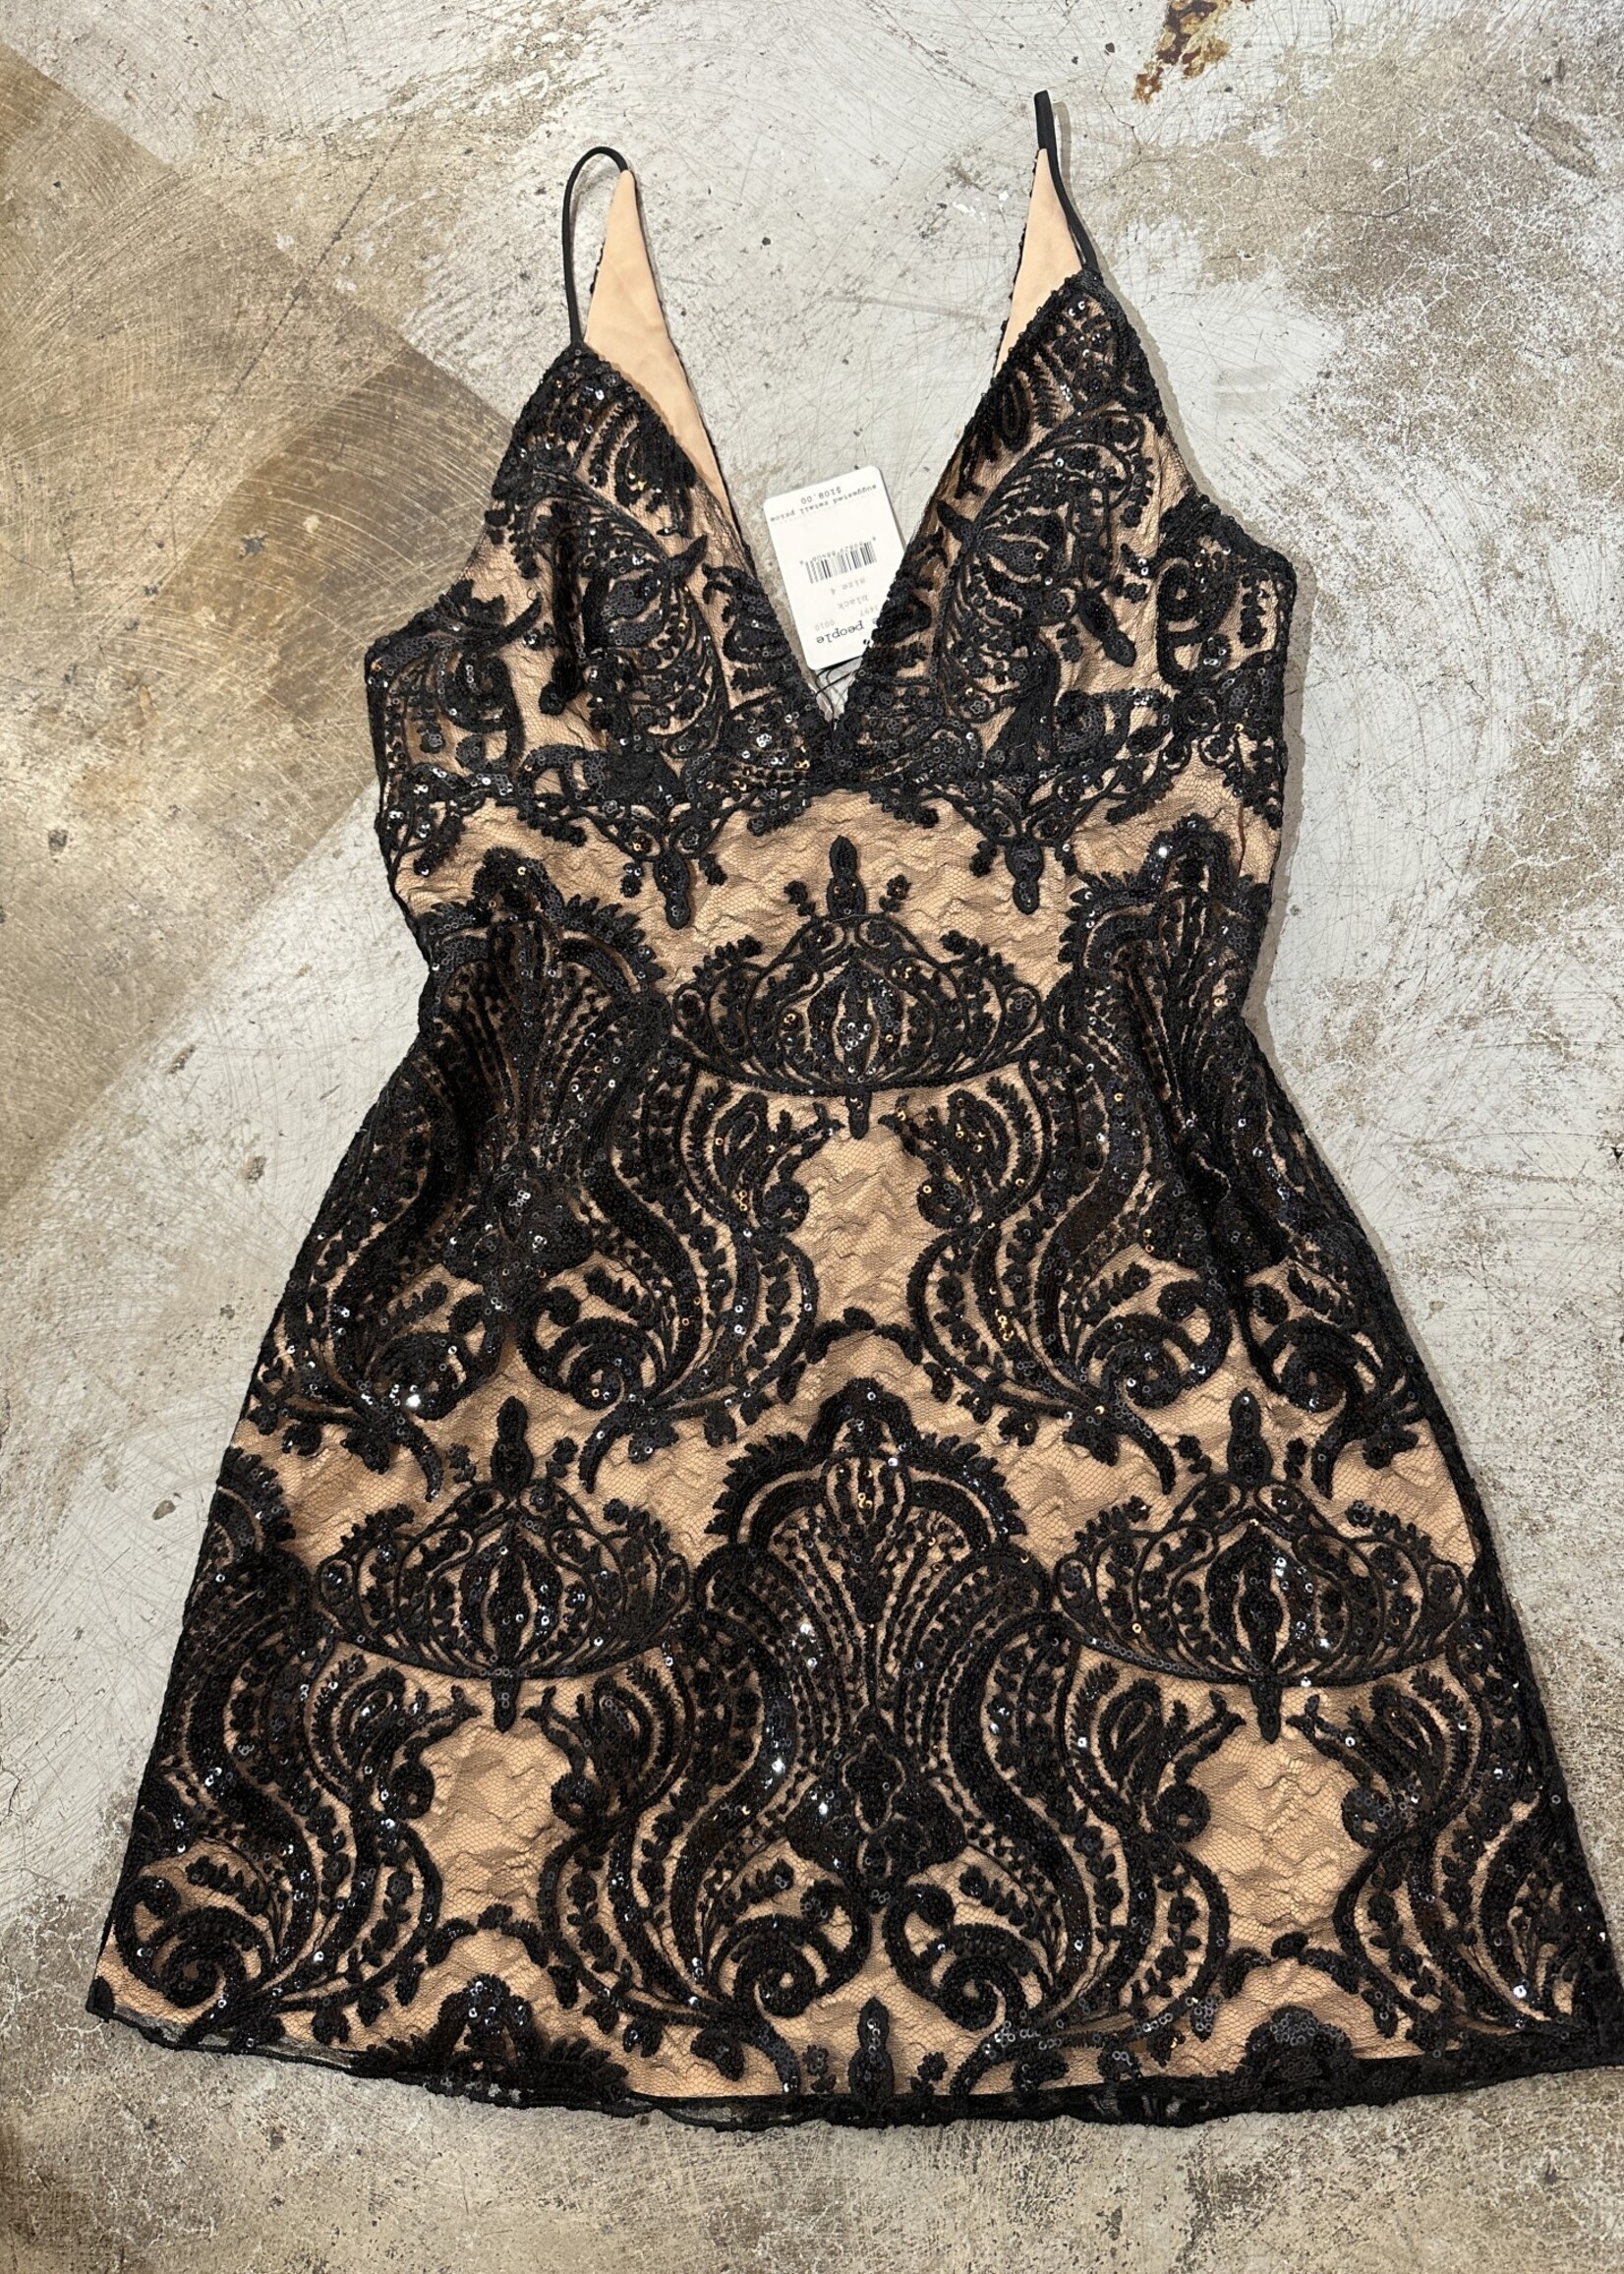 NWT Free People Black Lace Layer Dress 4/S